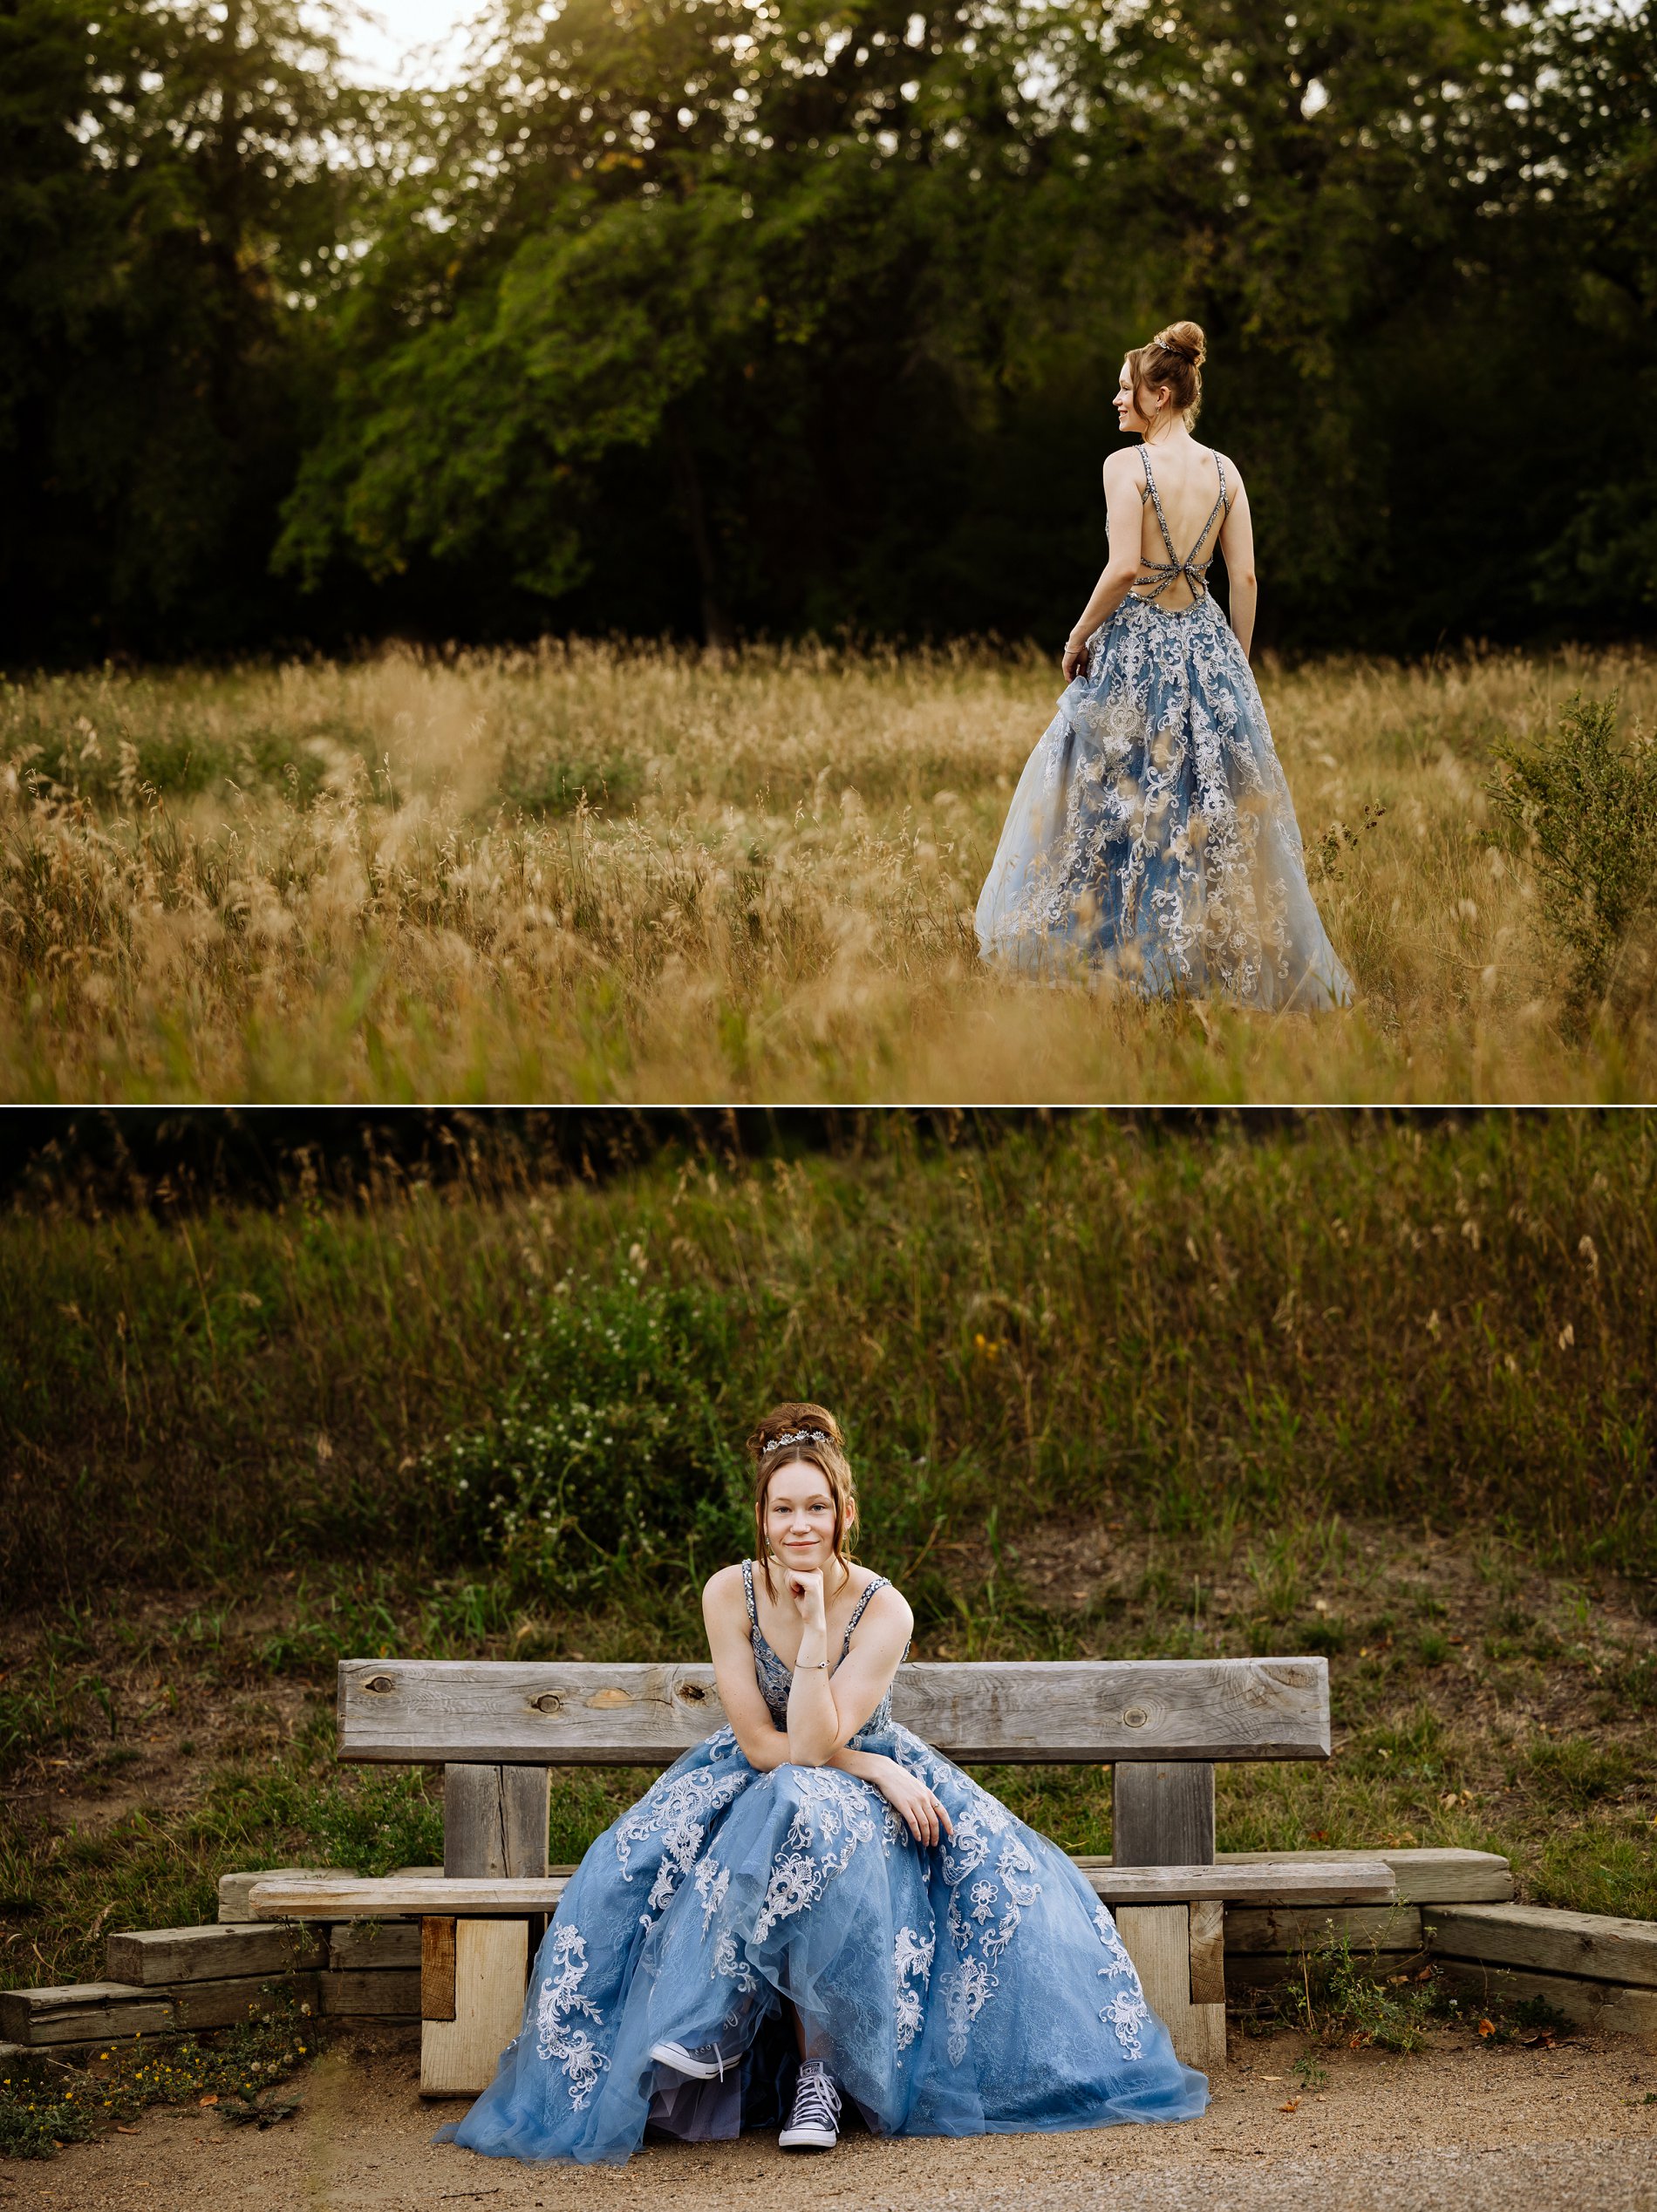 Girl in blue prom gown, tiara, and Converse sneakers stands in a field of tall grass and sits casually on a park bench.